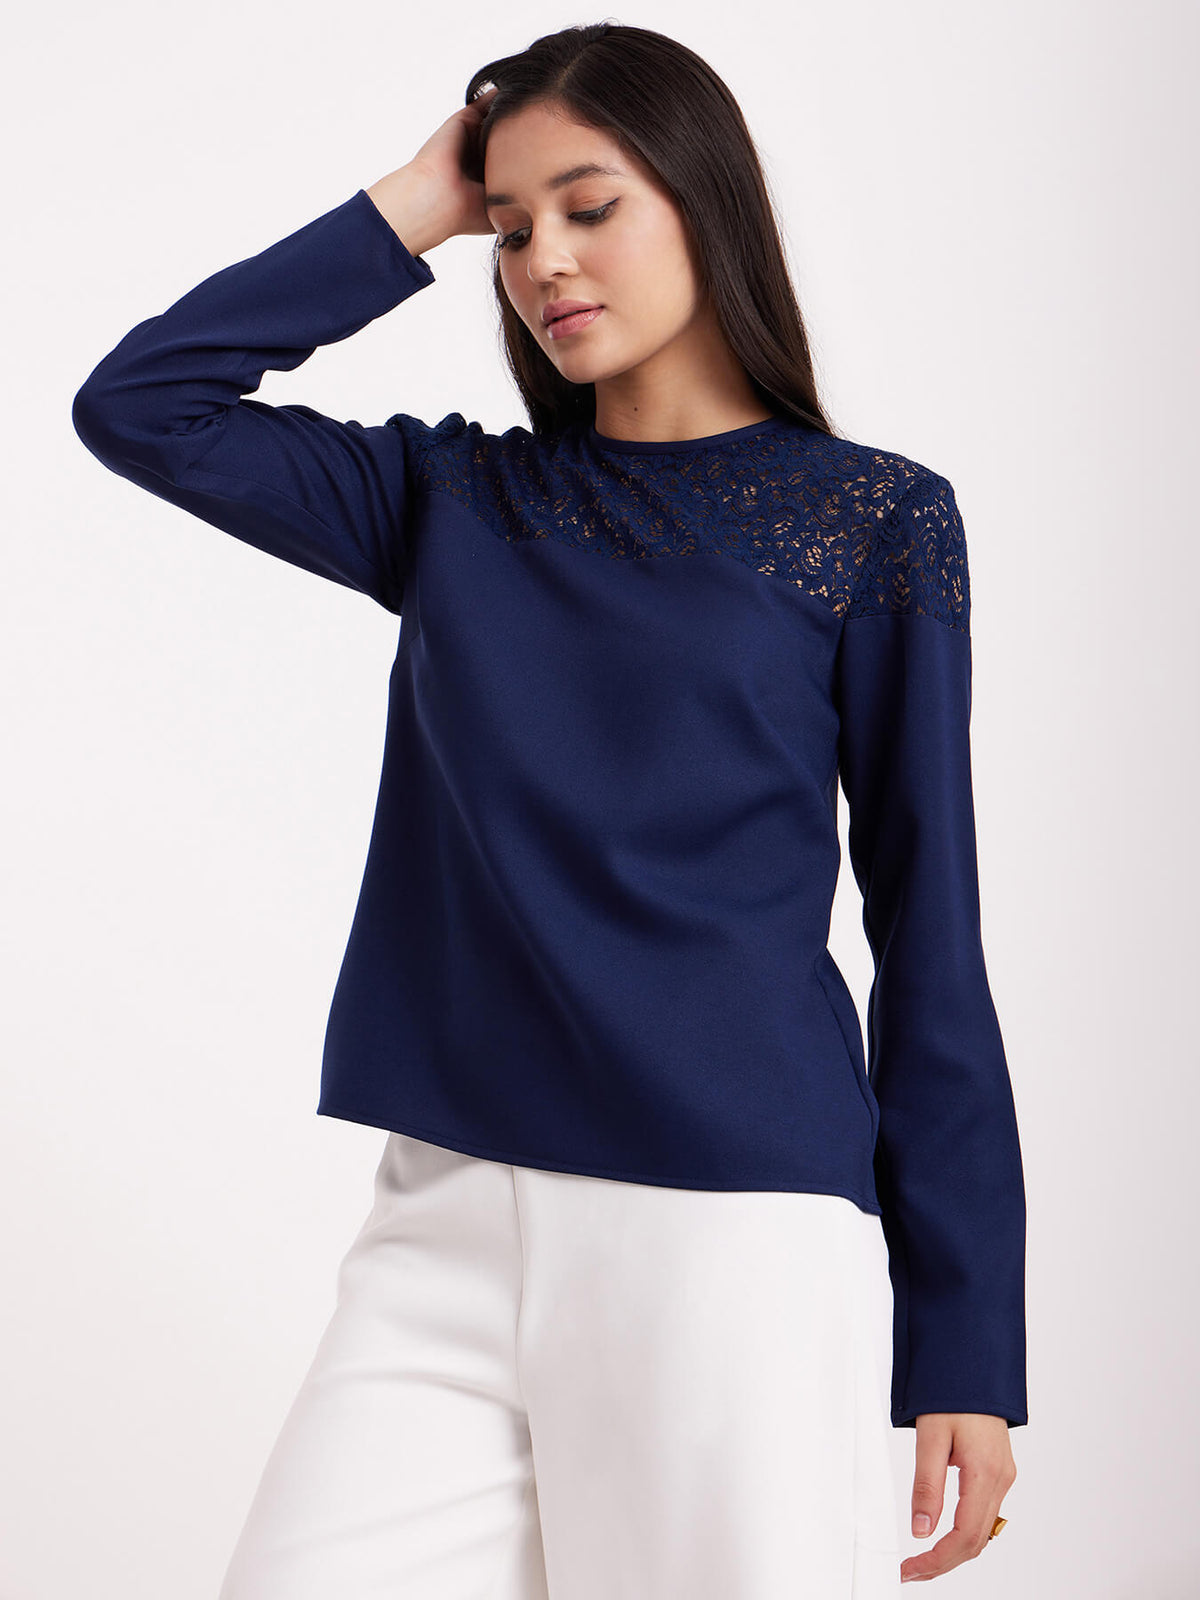 Full Sleeves Lace Top - Navy Blue